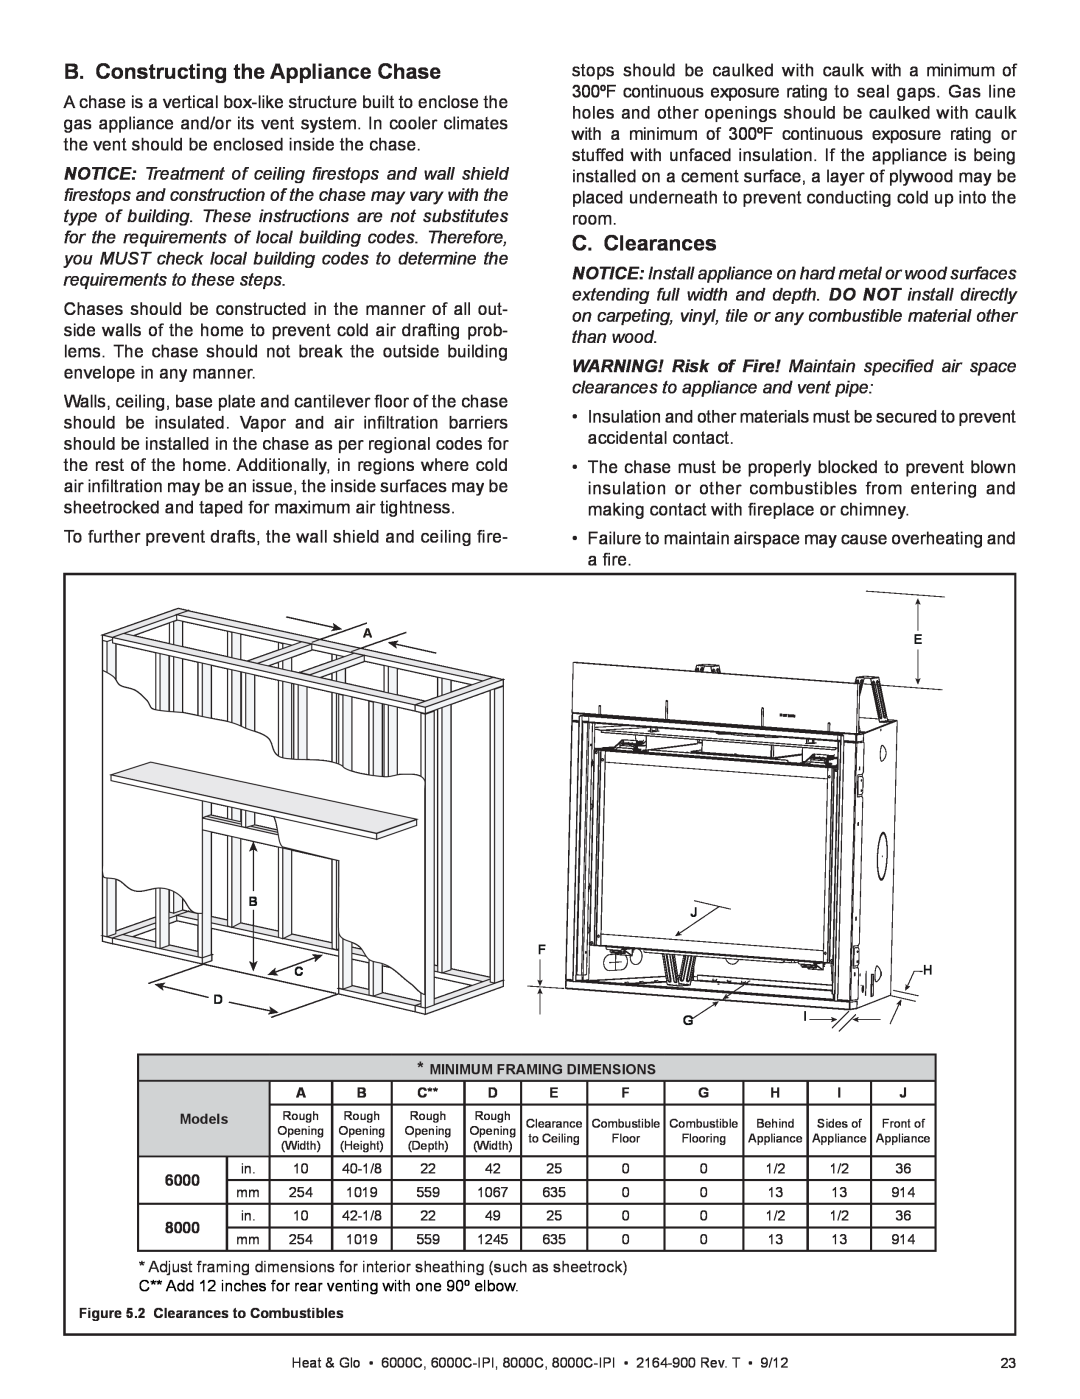 Heat & Glo LifeStyle 6000C manual B. Constructing the Appliance Chase, C. Clearances 